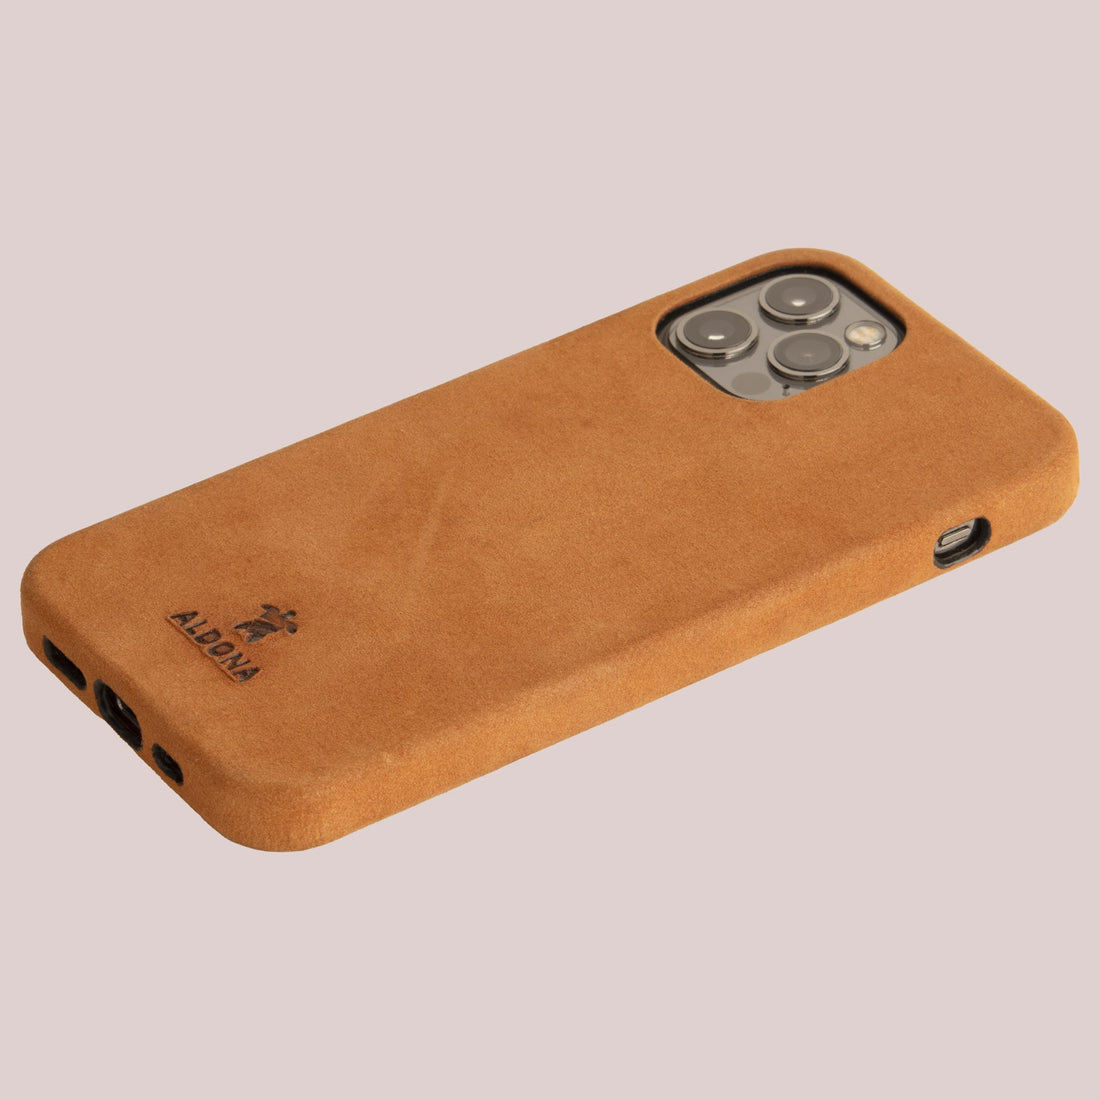 Kalon Case for iPhone with MagSafe Compatibility